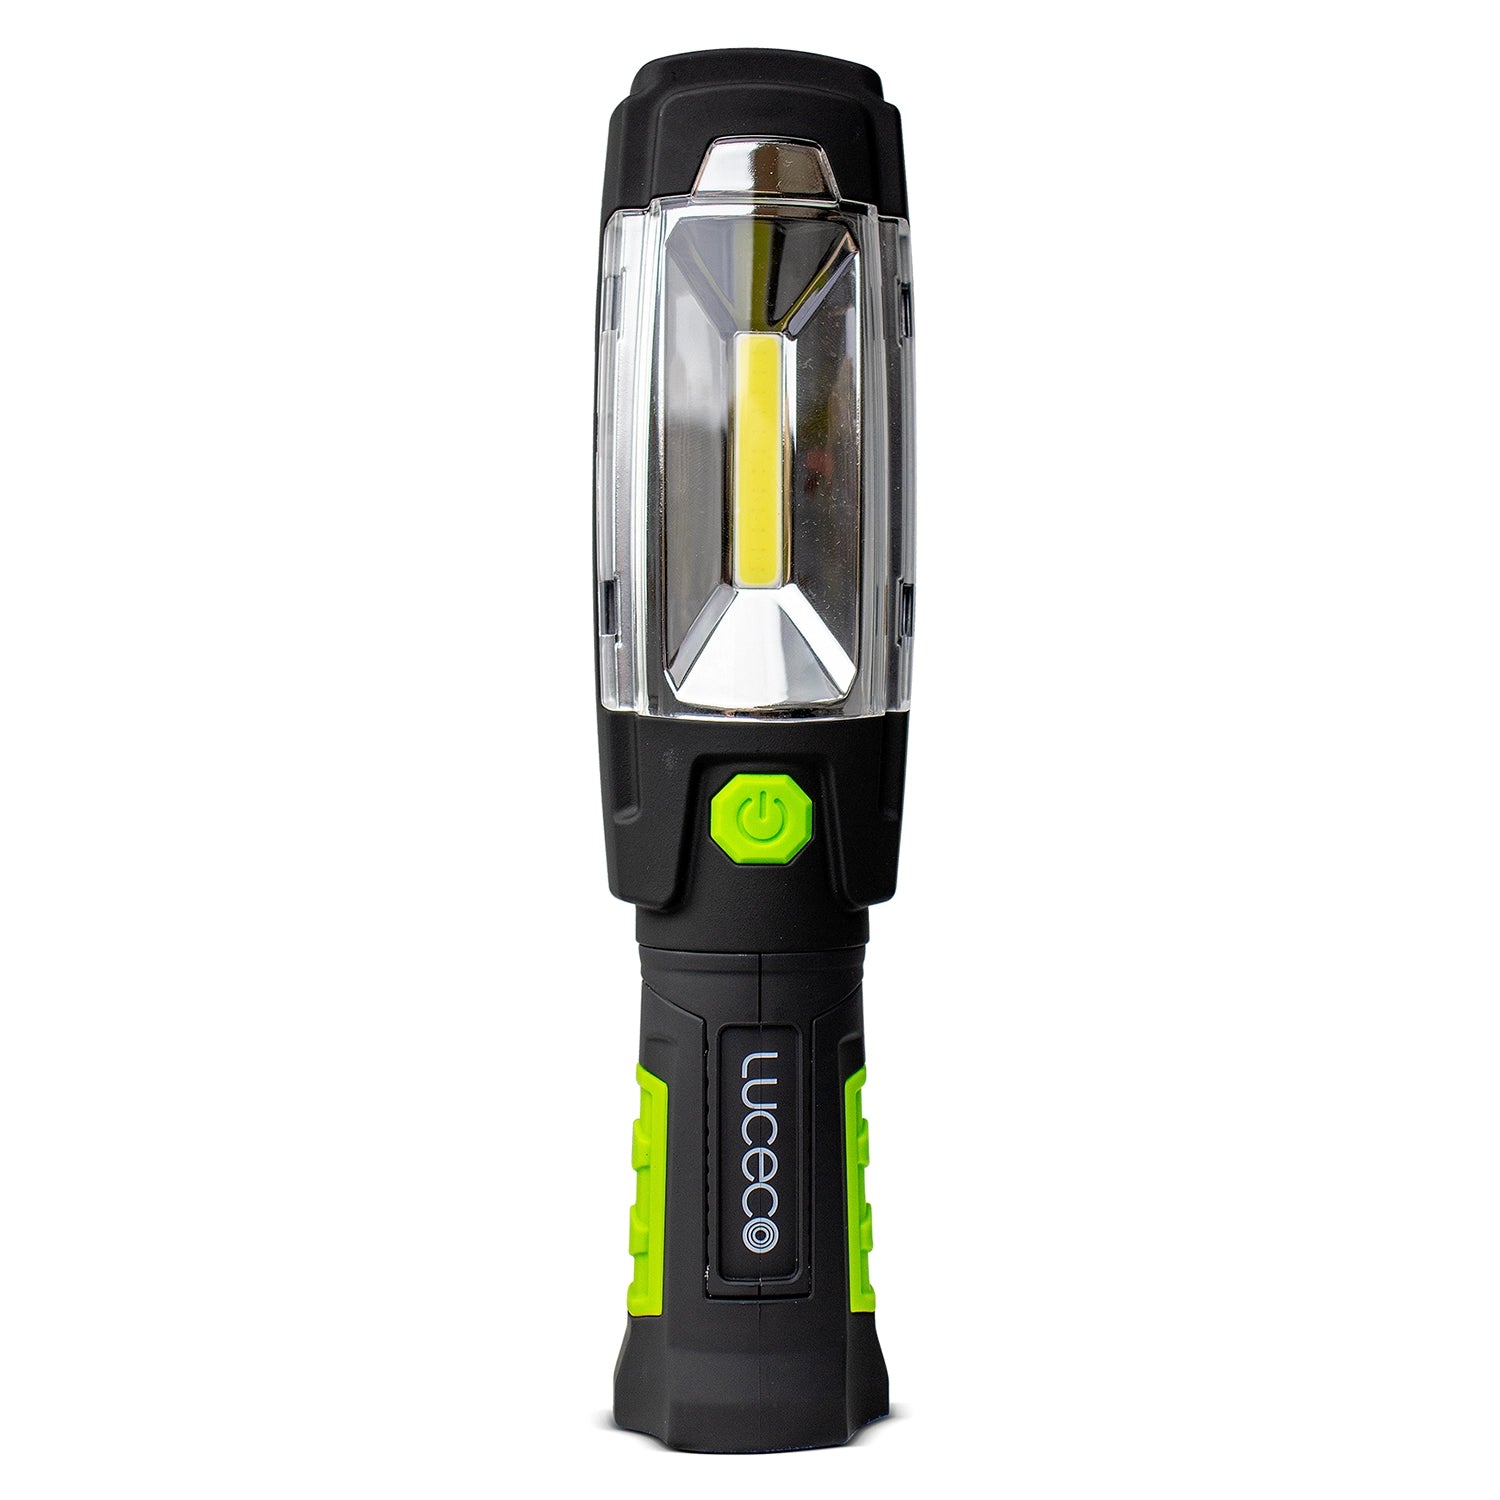 Luceco Rotation Inspection Torch with Powerbank 5V 3W 300LM 6500K